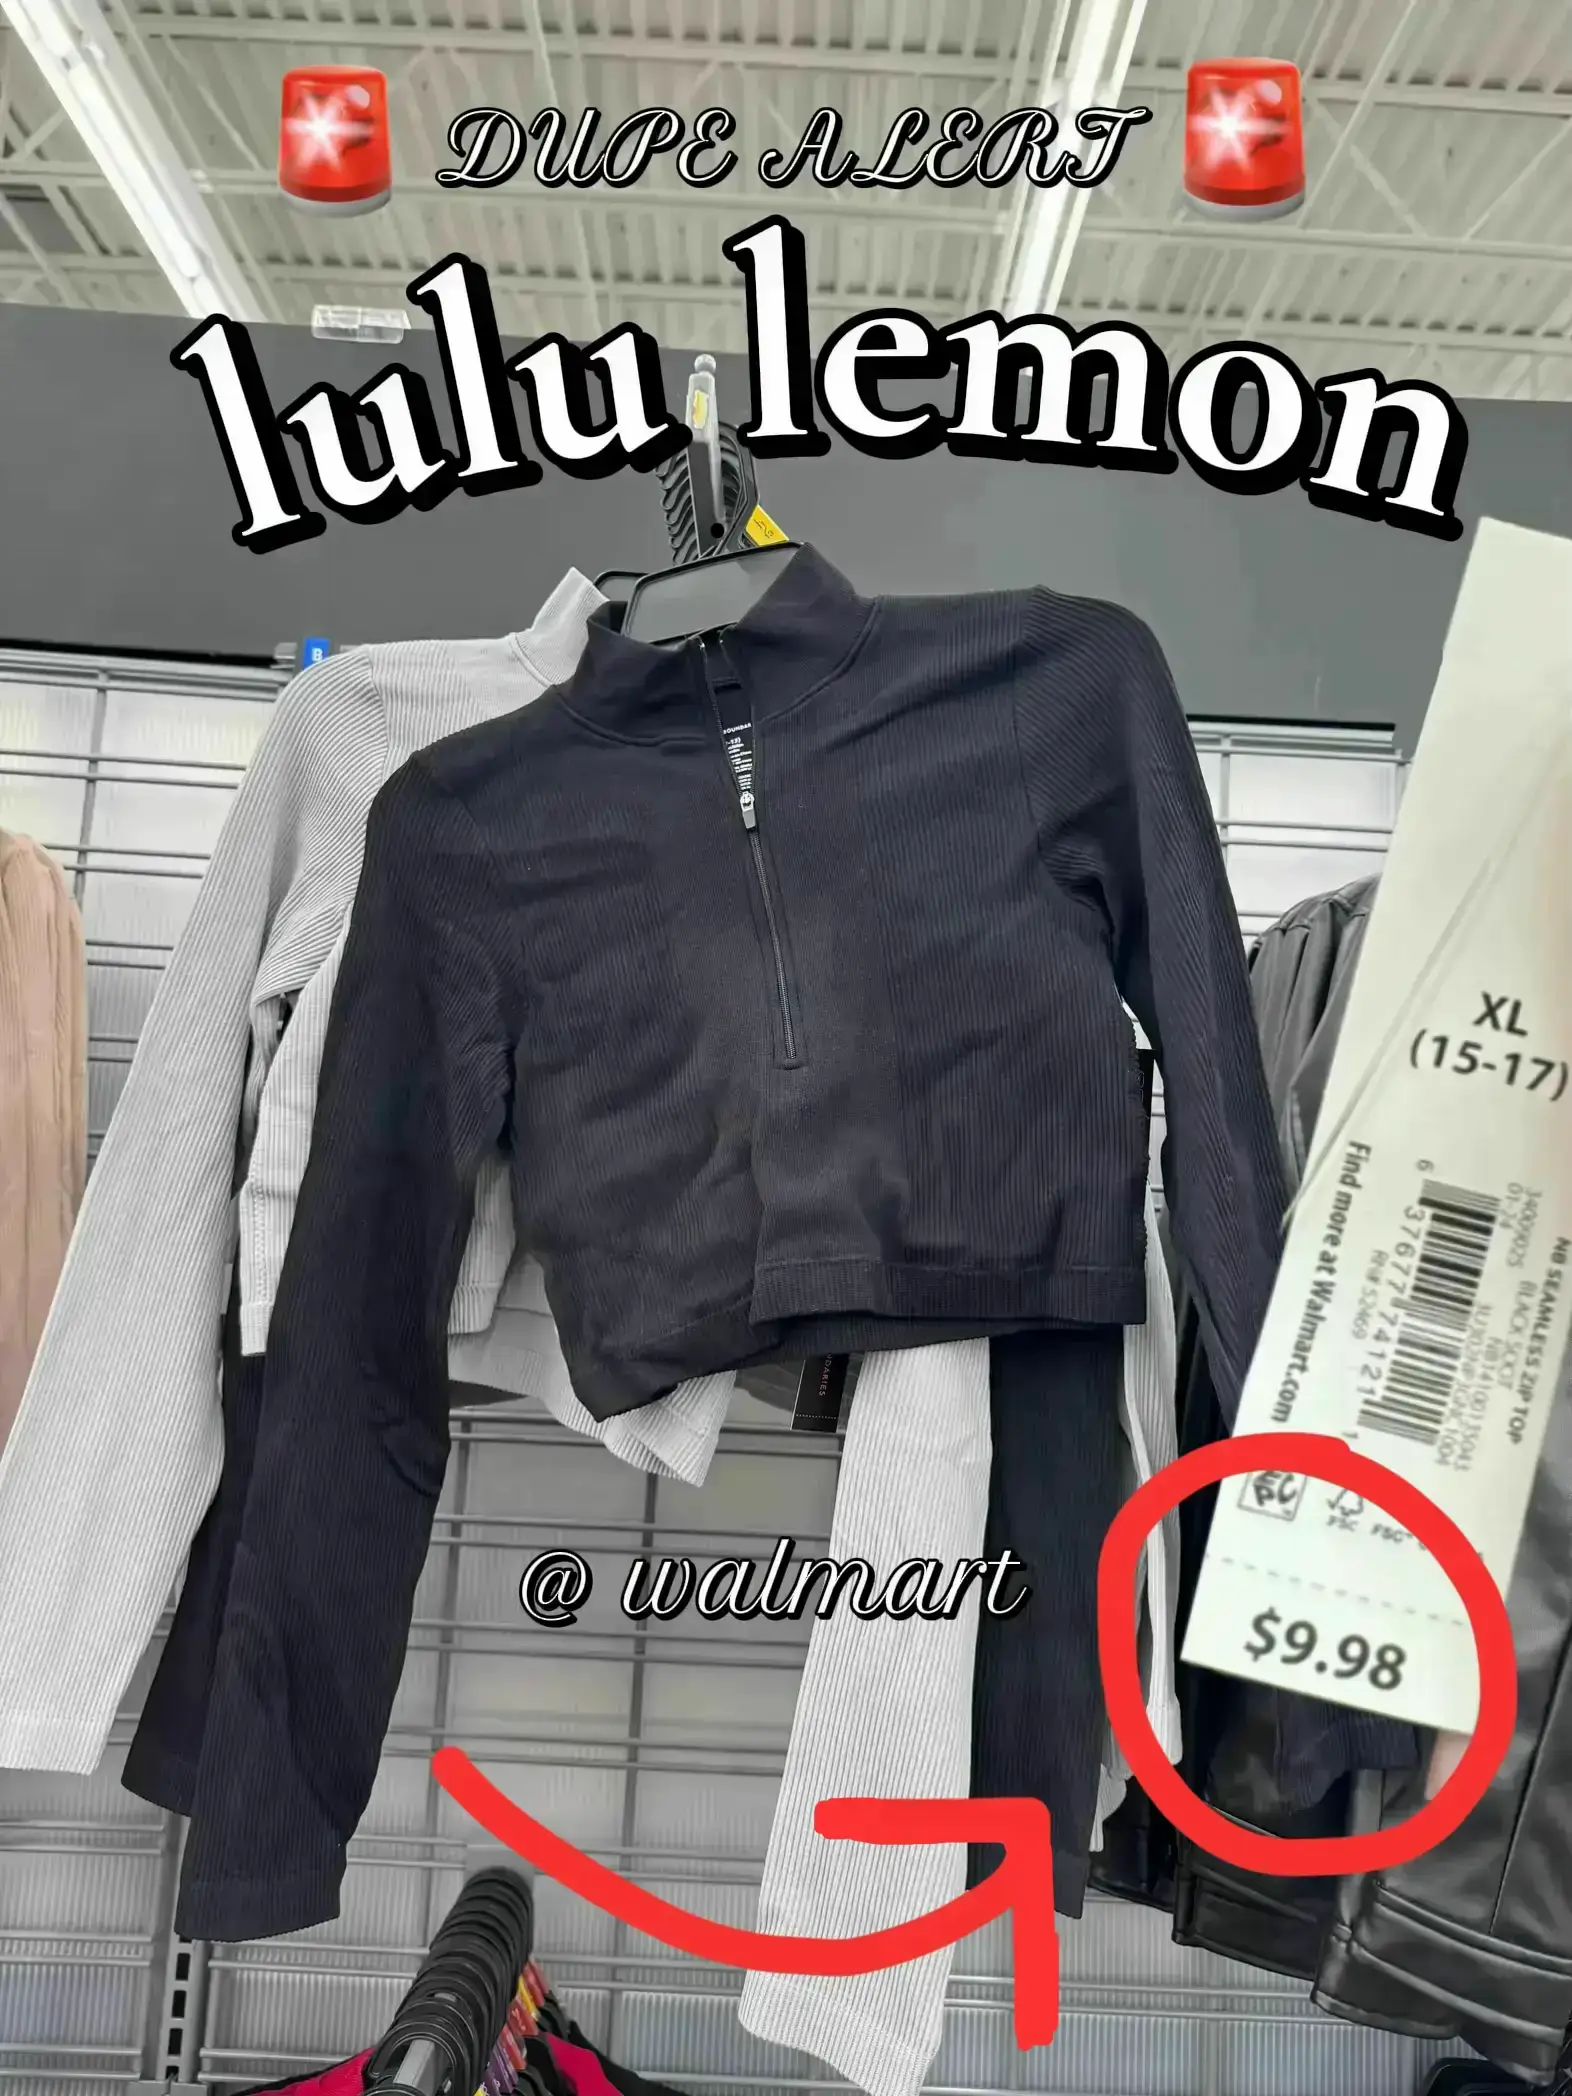 I'm a shopping expert and found Lululemon dupes at a steal compared to the  $118 price tag